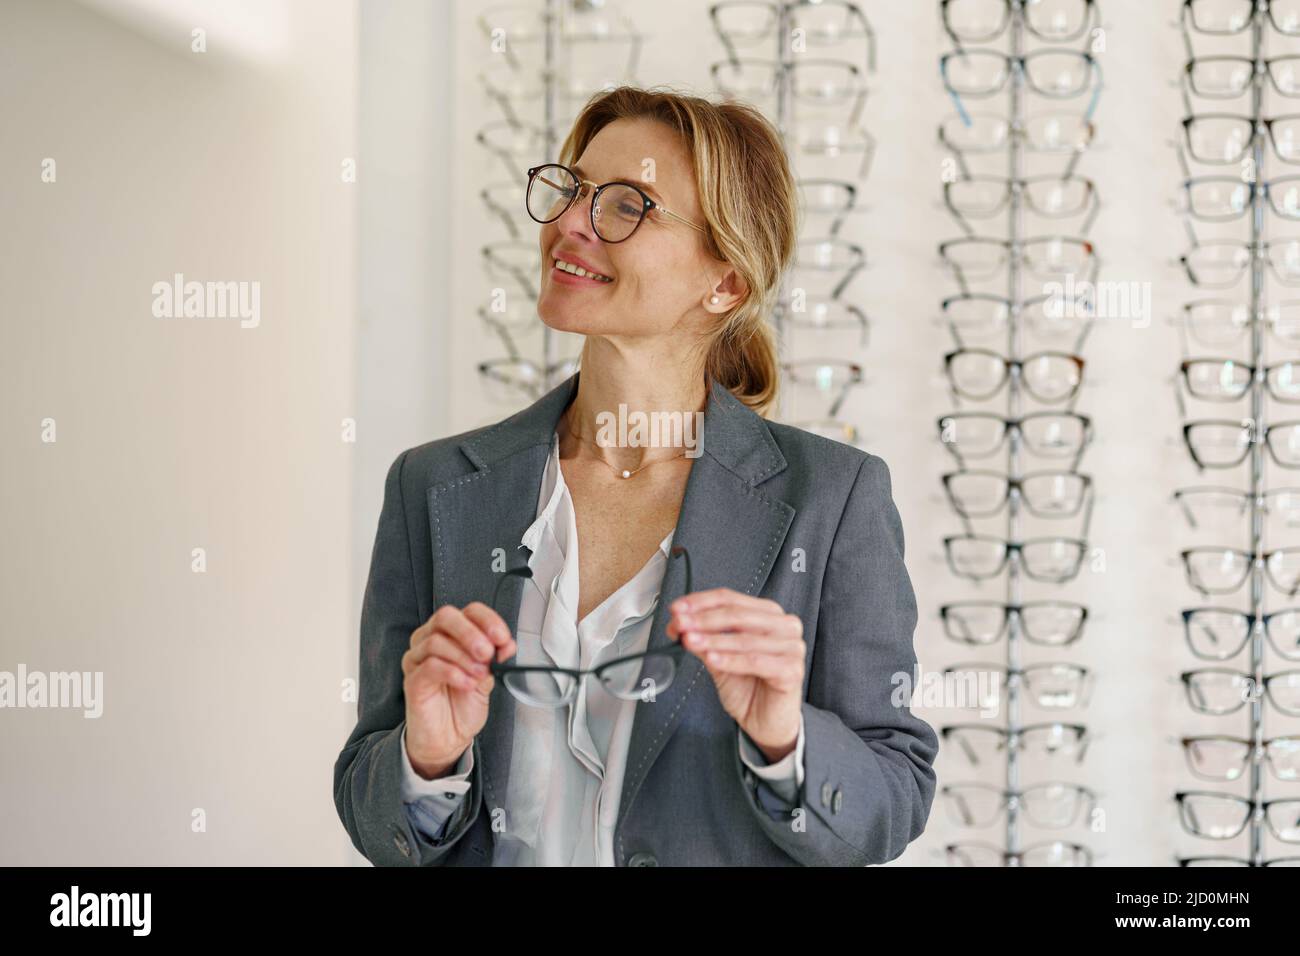 Businesswoman chooses a spectacle frame in an optician's shop Stock Photo